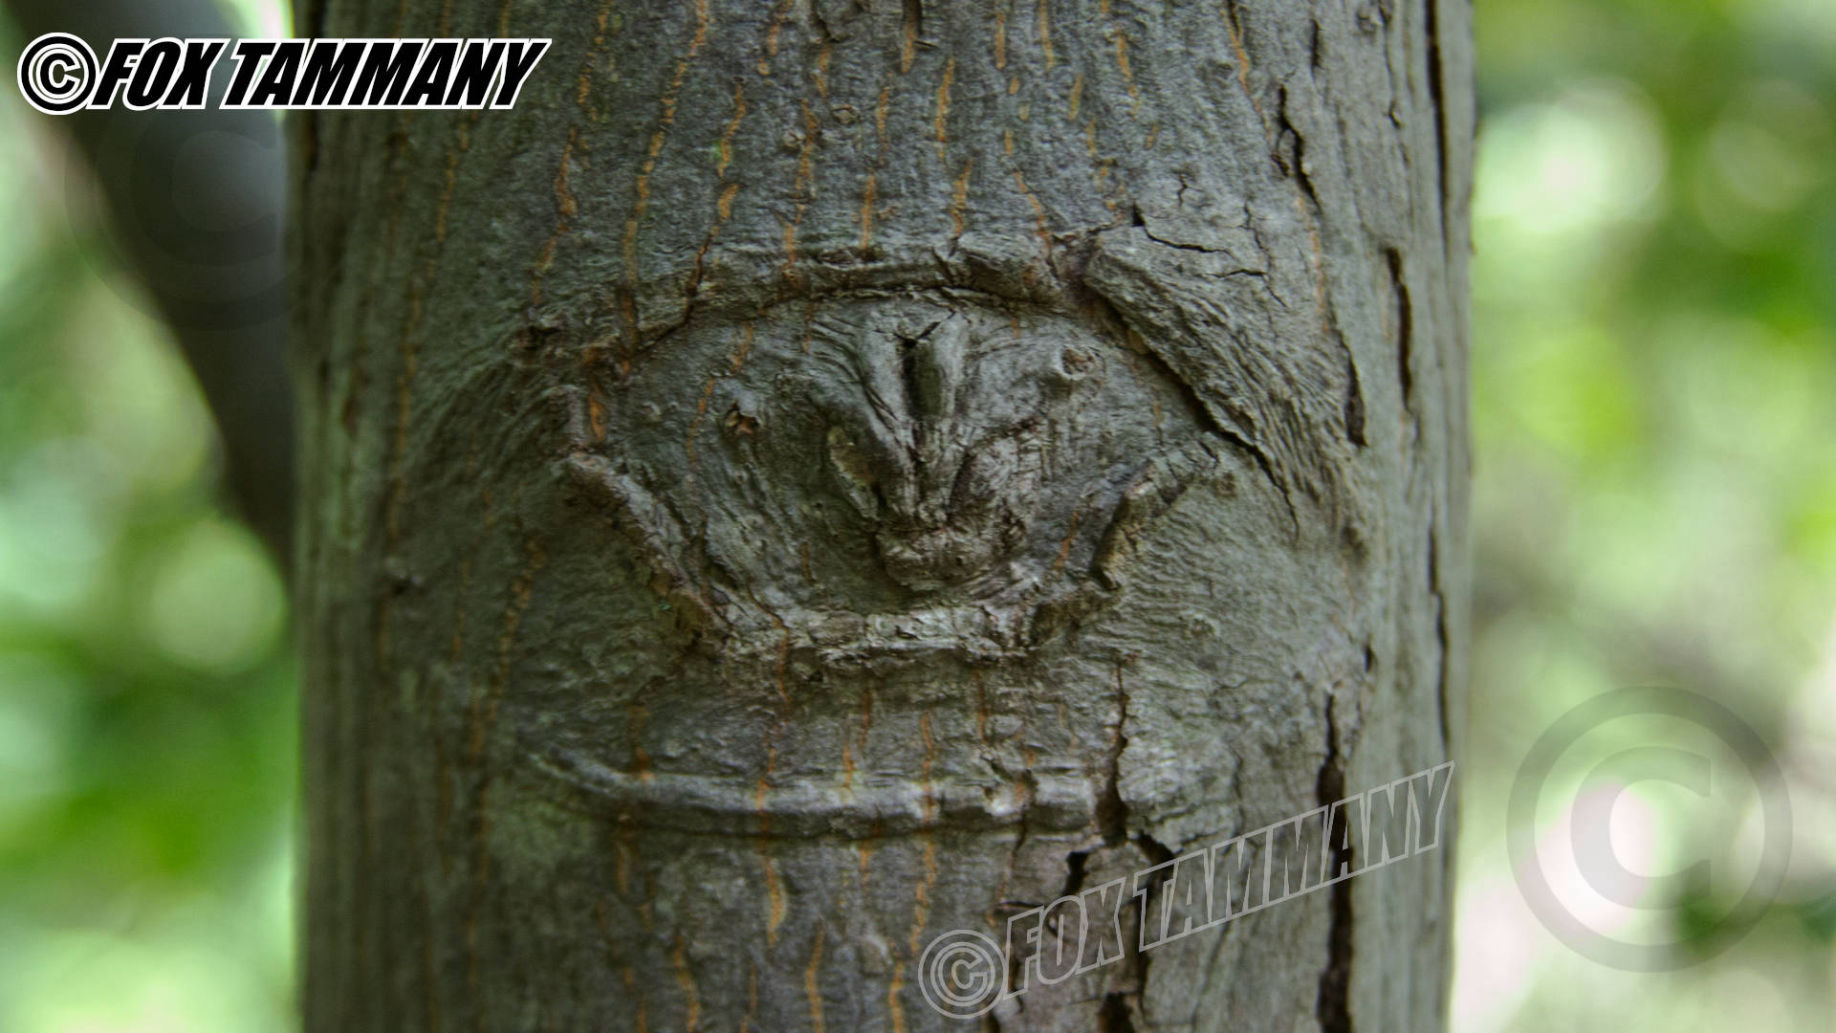 Chapter 04: Symbolic Tree Growth Carvings